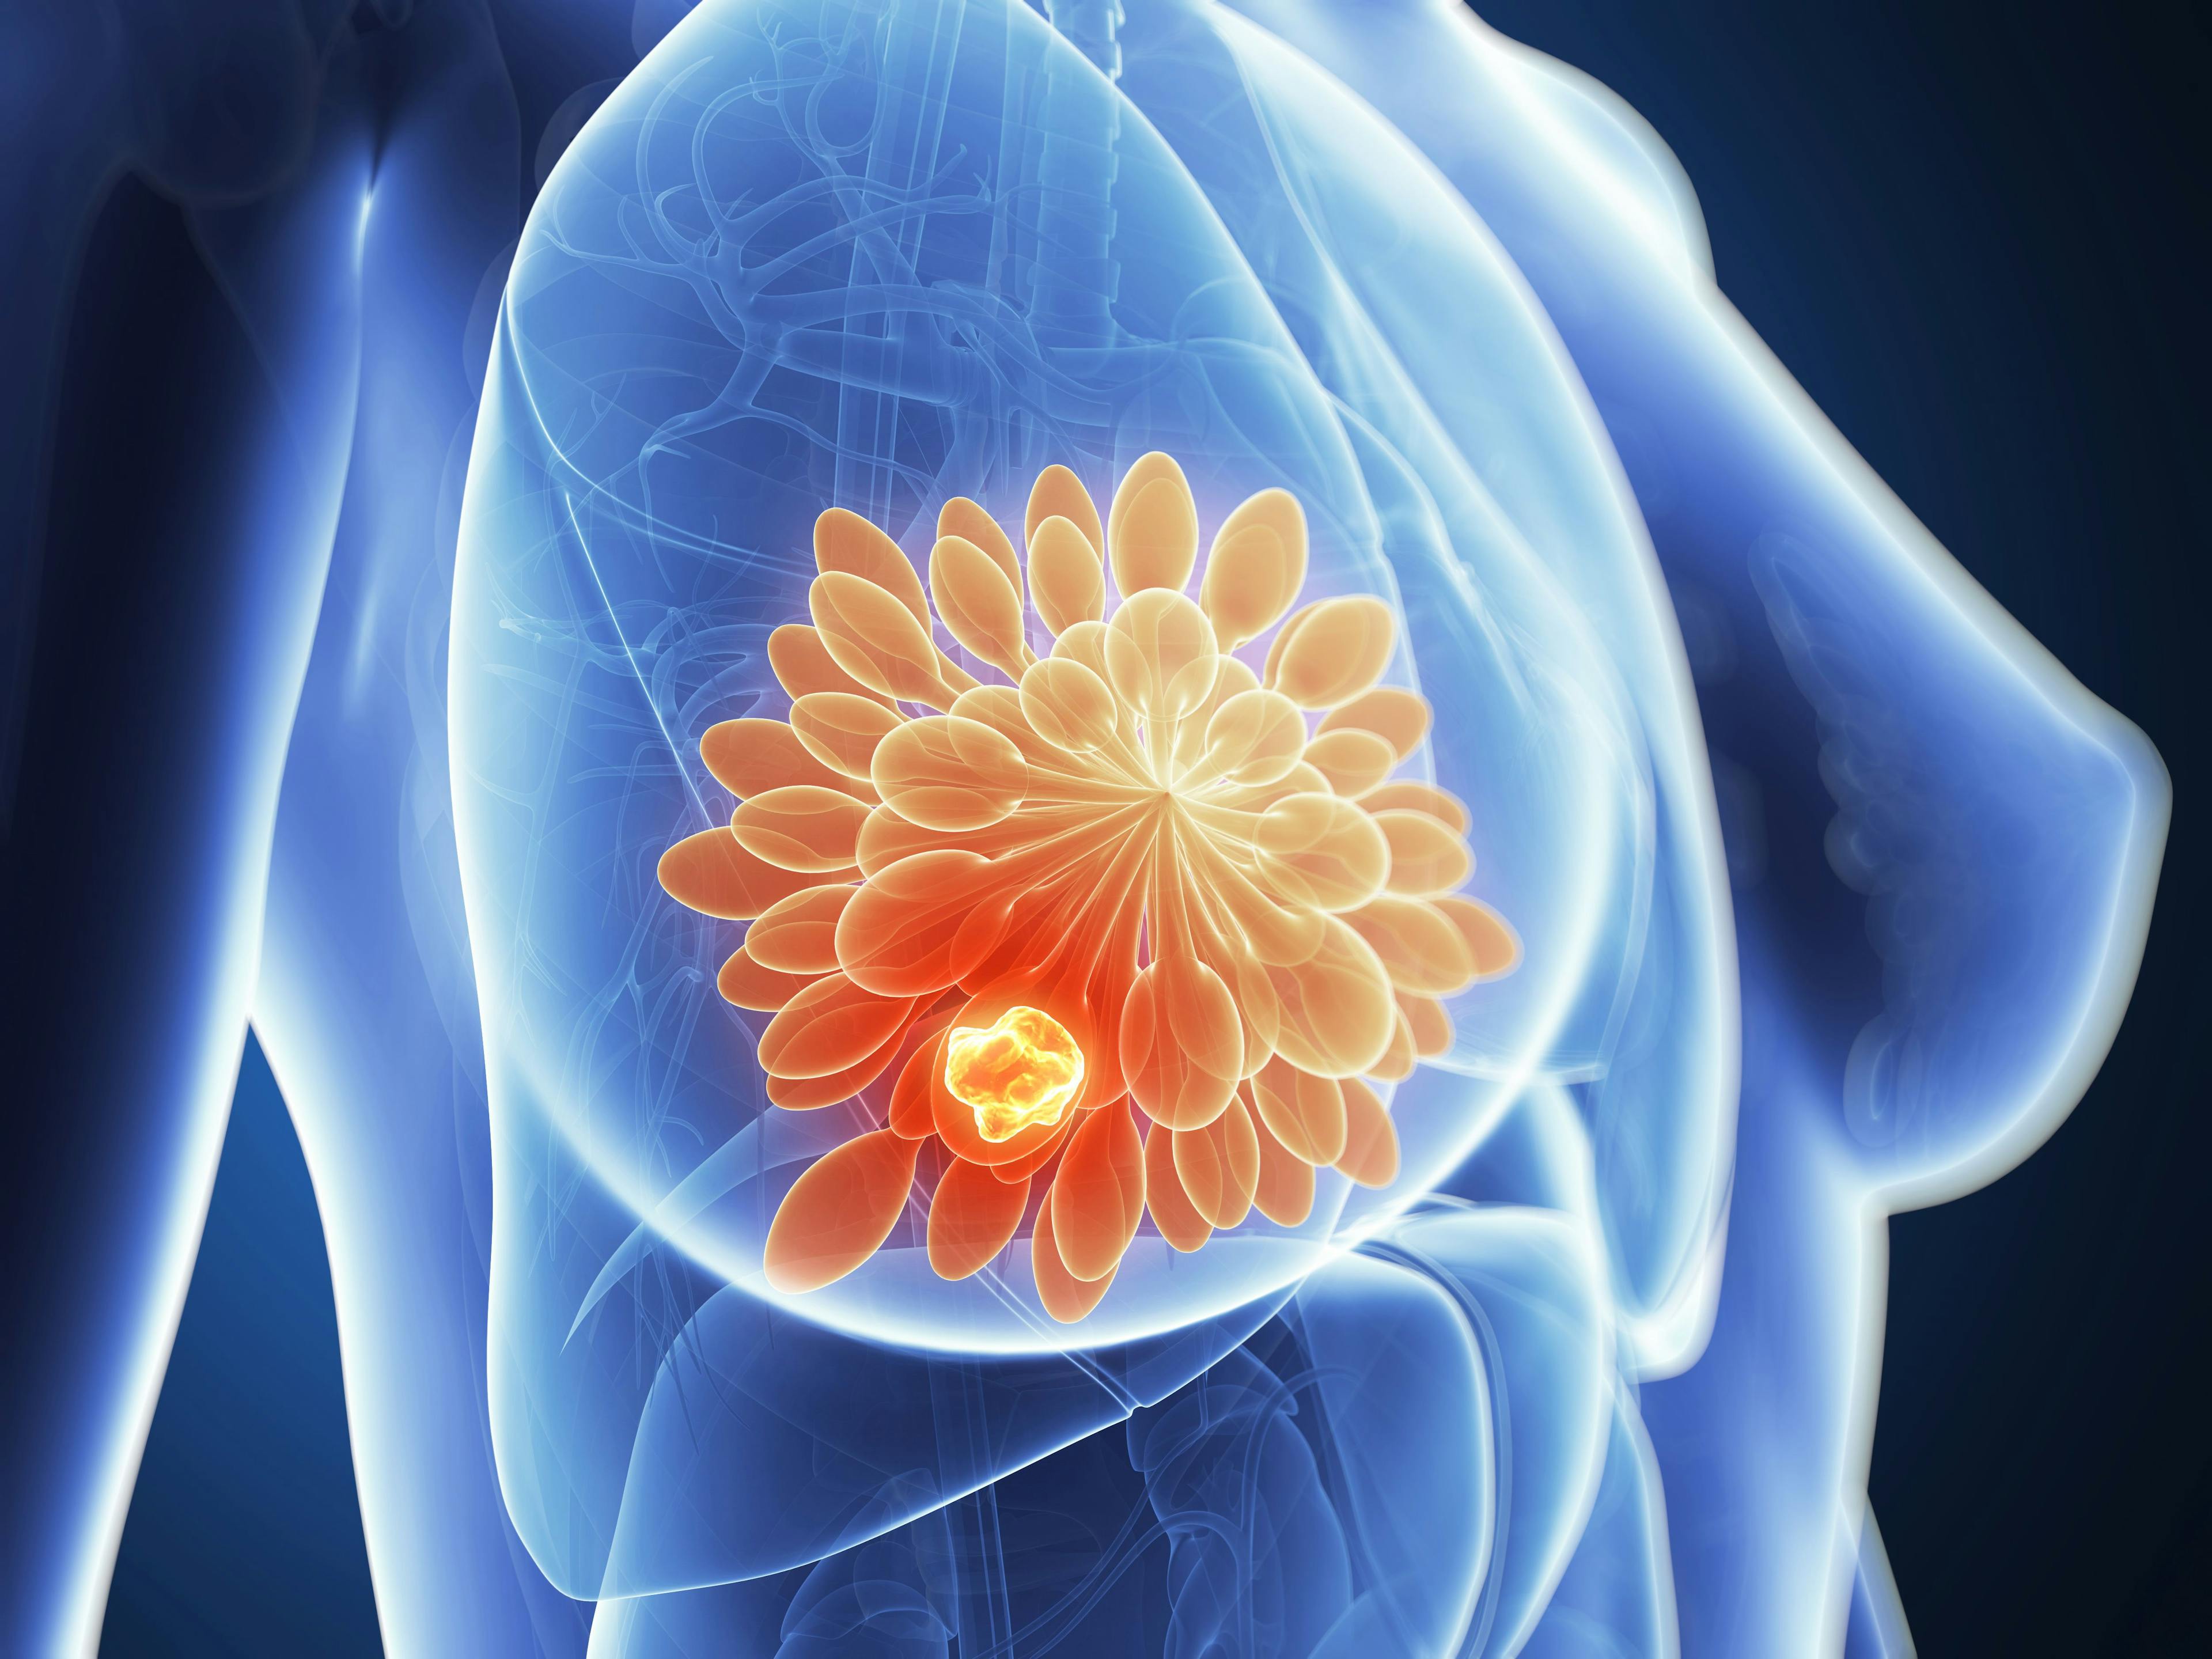 Study: More Targeted Cancer Prevention and Early Detection Strategies Needed in Breast Cancer Survivorship